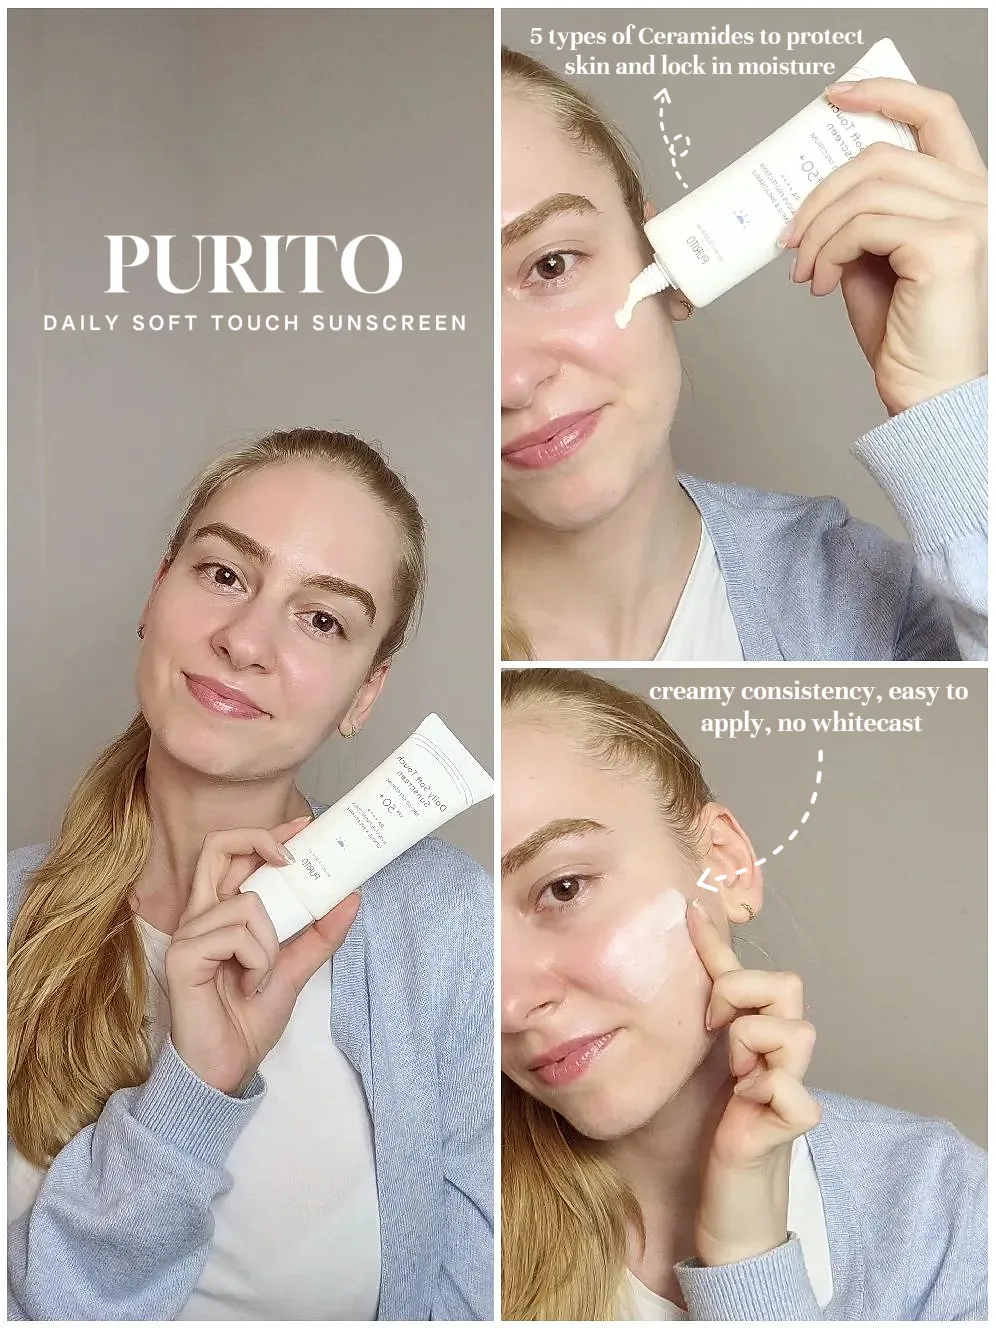 PURITO Daily Soft Touch Sunscreen